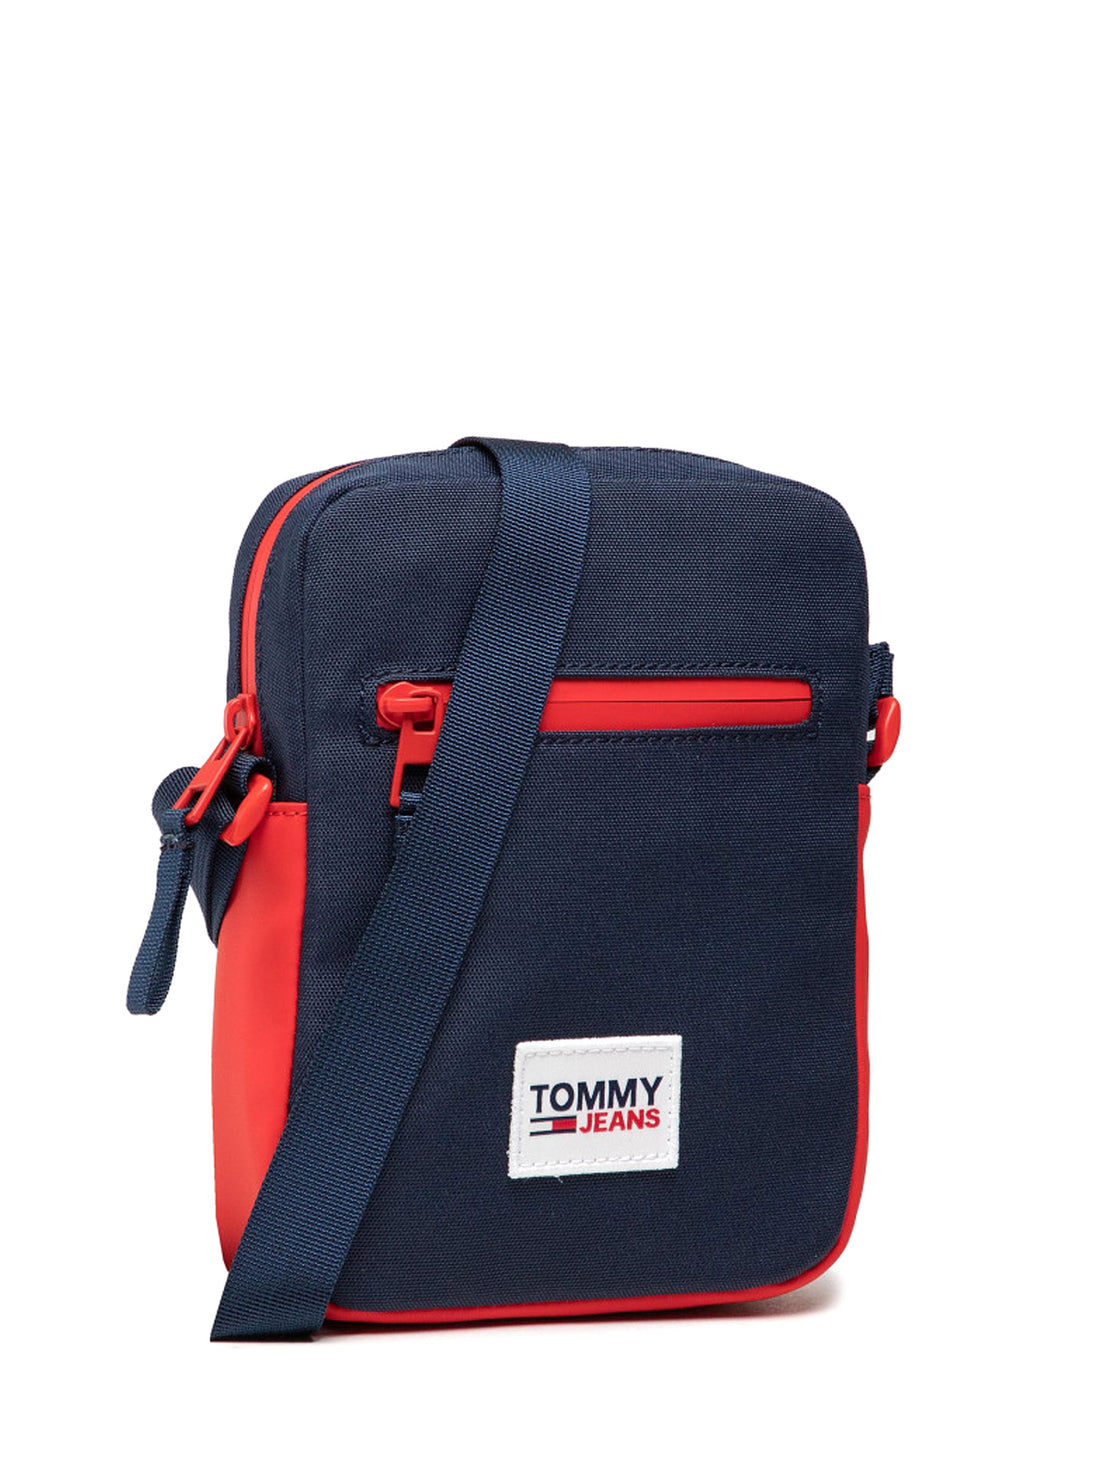 Tracolla Blu Tommy Jeans